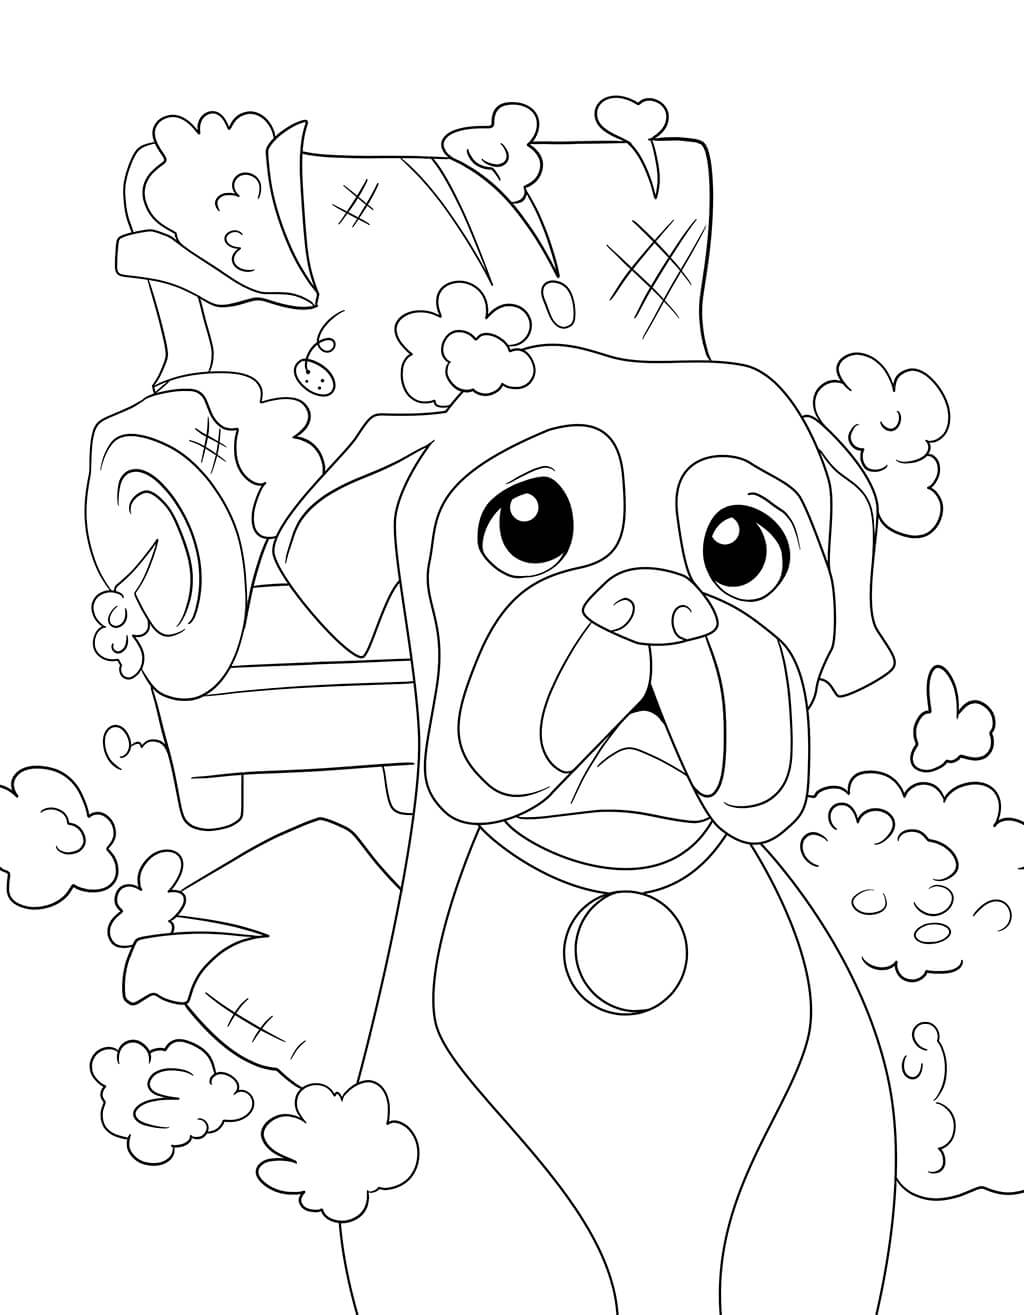 Dog Coloring Book for Kids